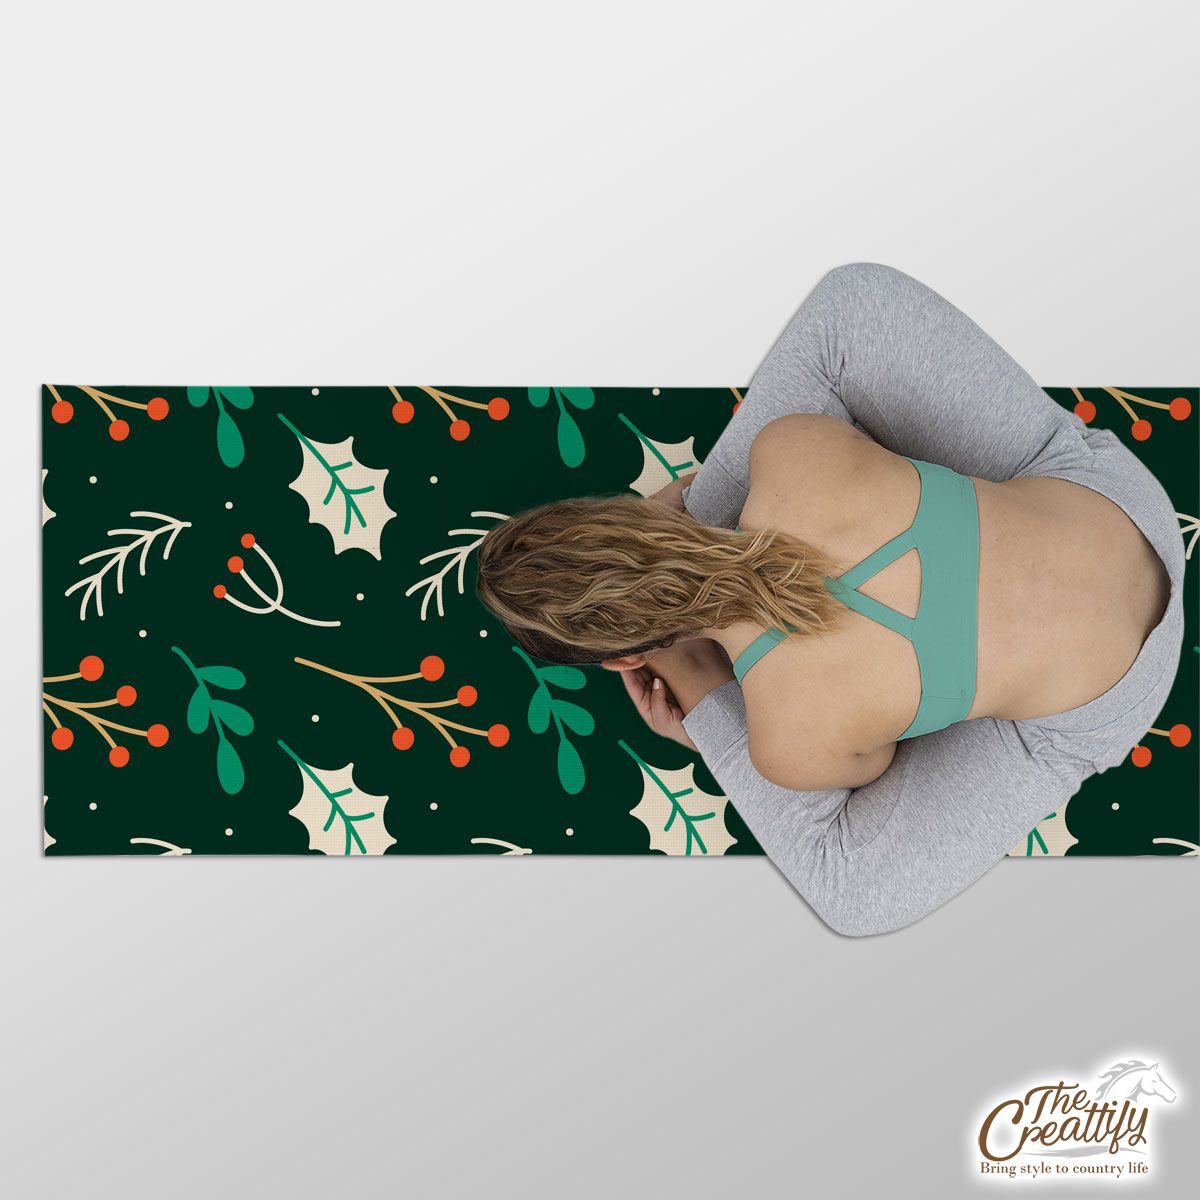 Red Berries And Holly Leaf Pattern Yoga Mat